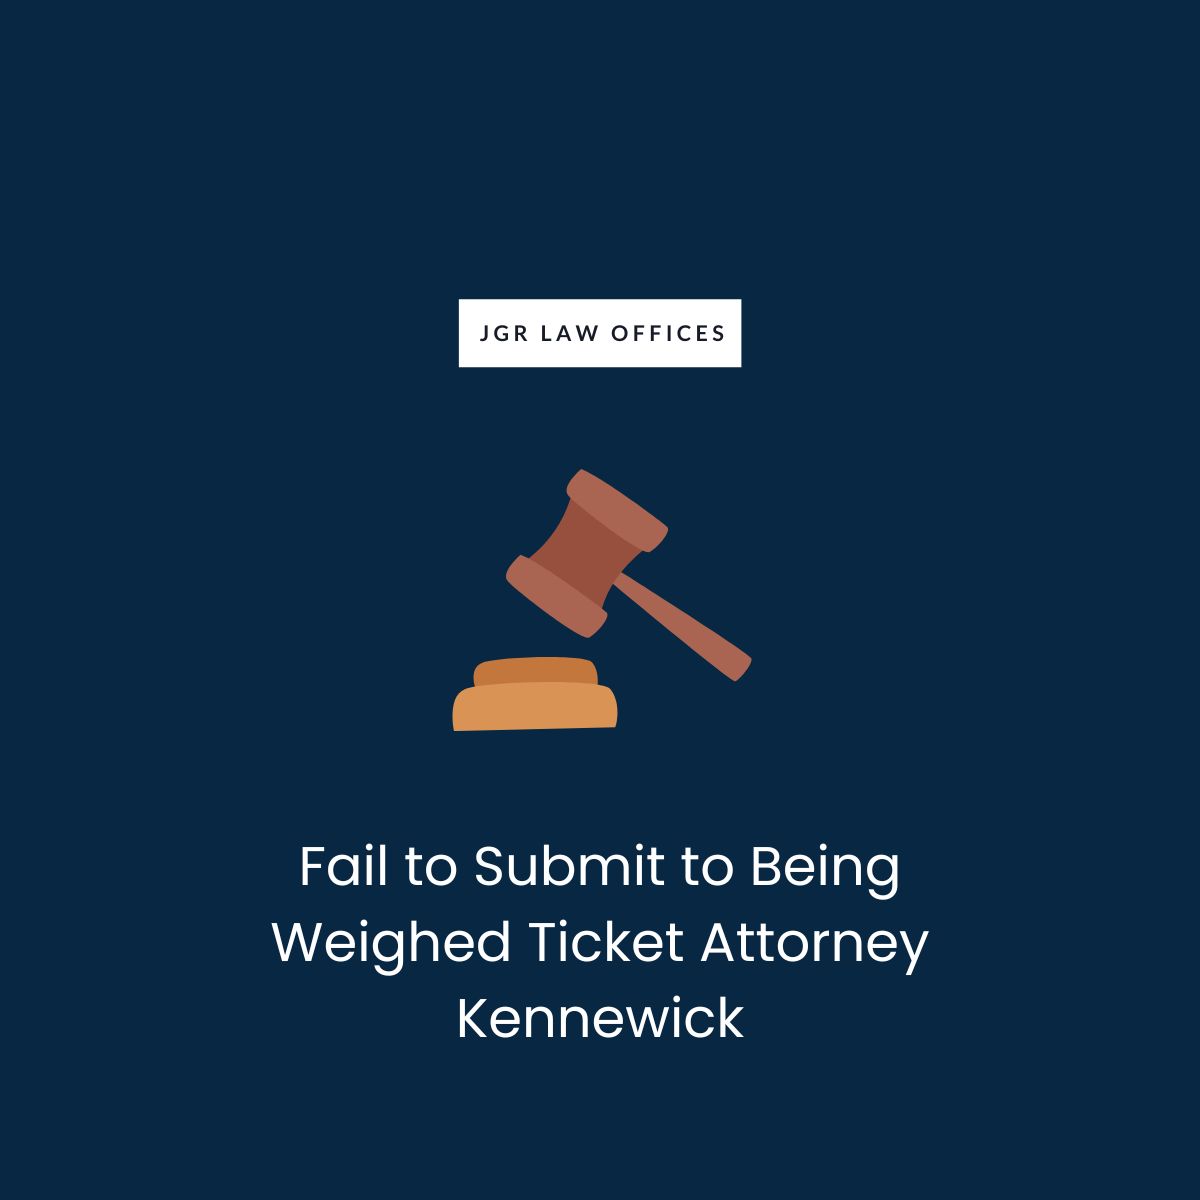 Fail to Submit to Being Weighed Ticket Attorney Kennewick